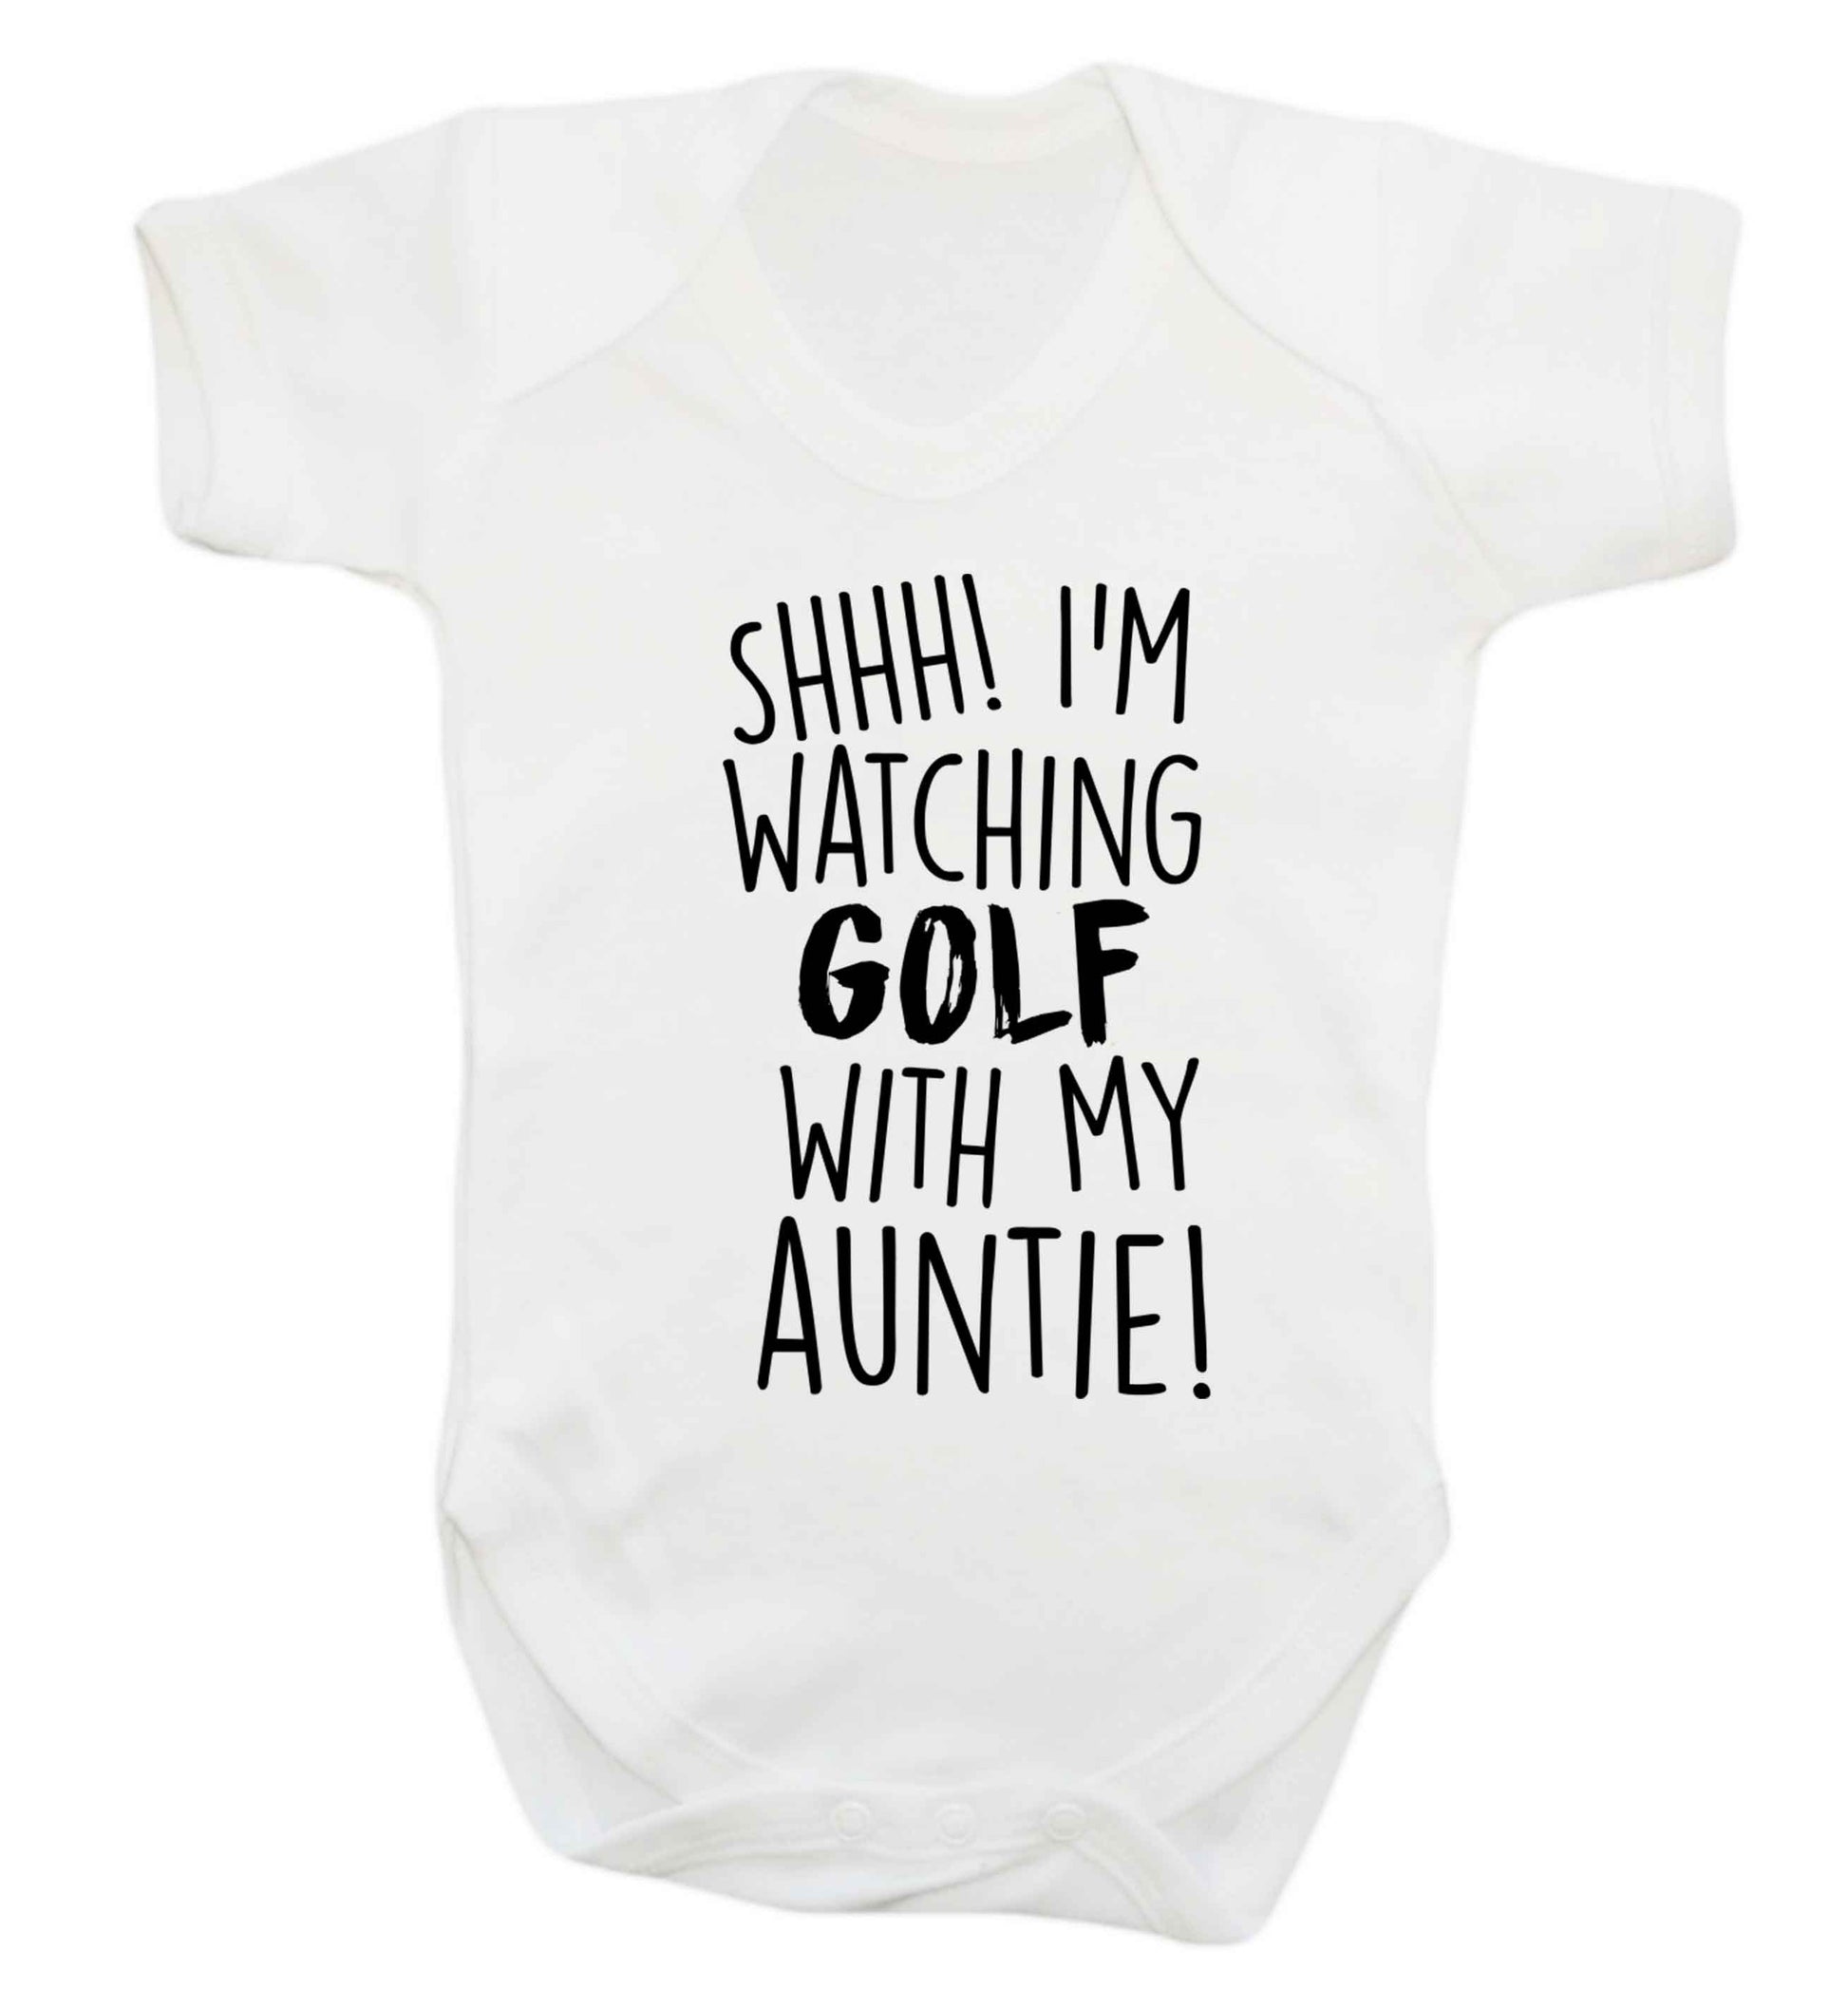 Shh I'm watching golf with my auntie Baby Vest white 18-24 months